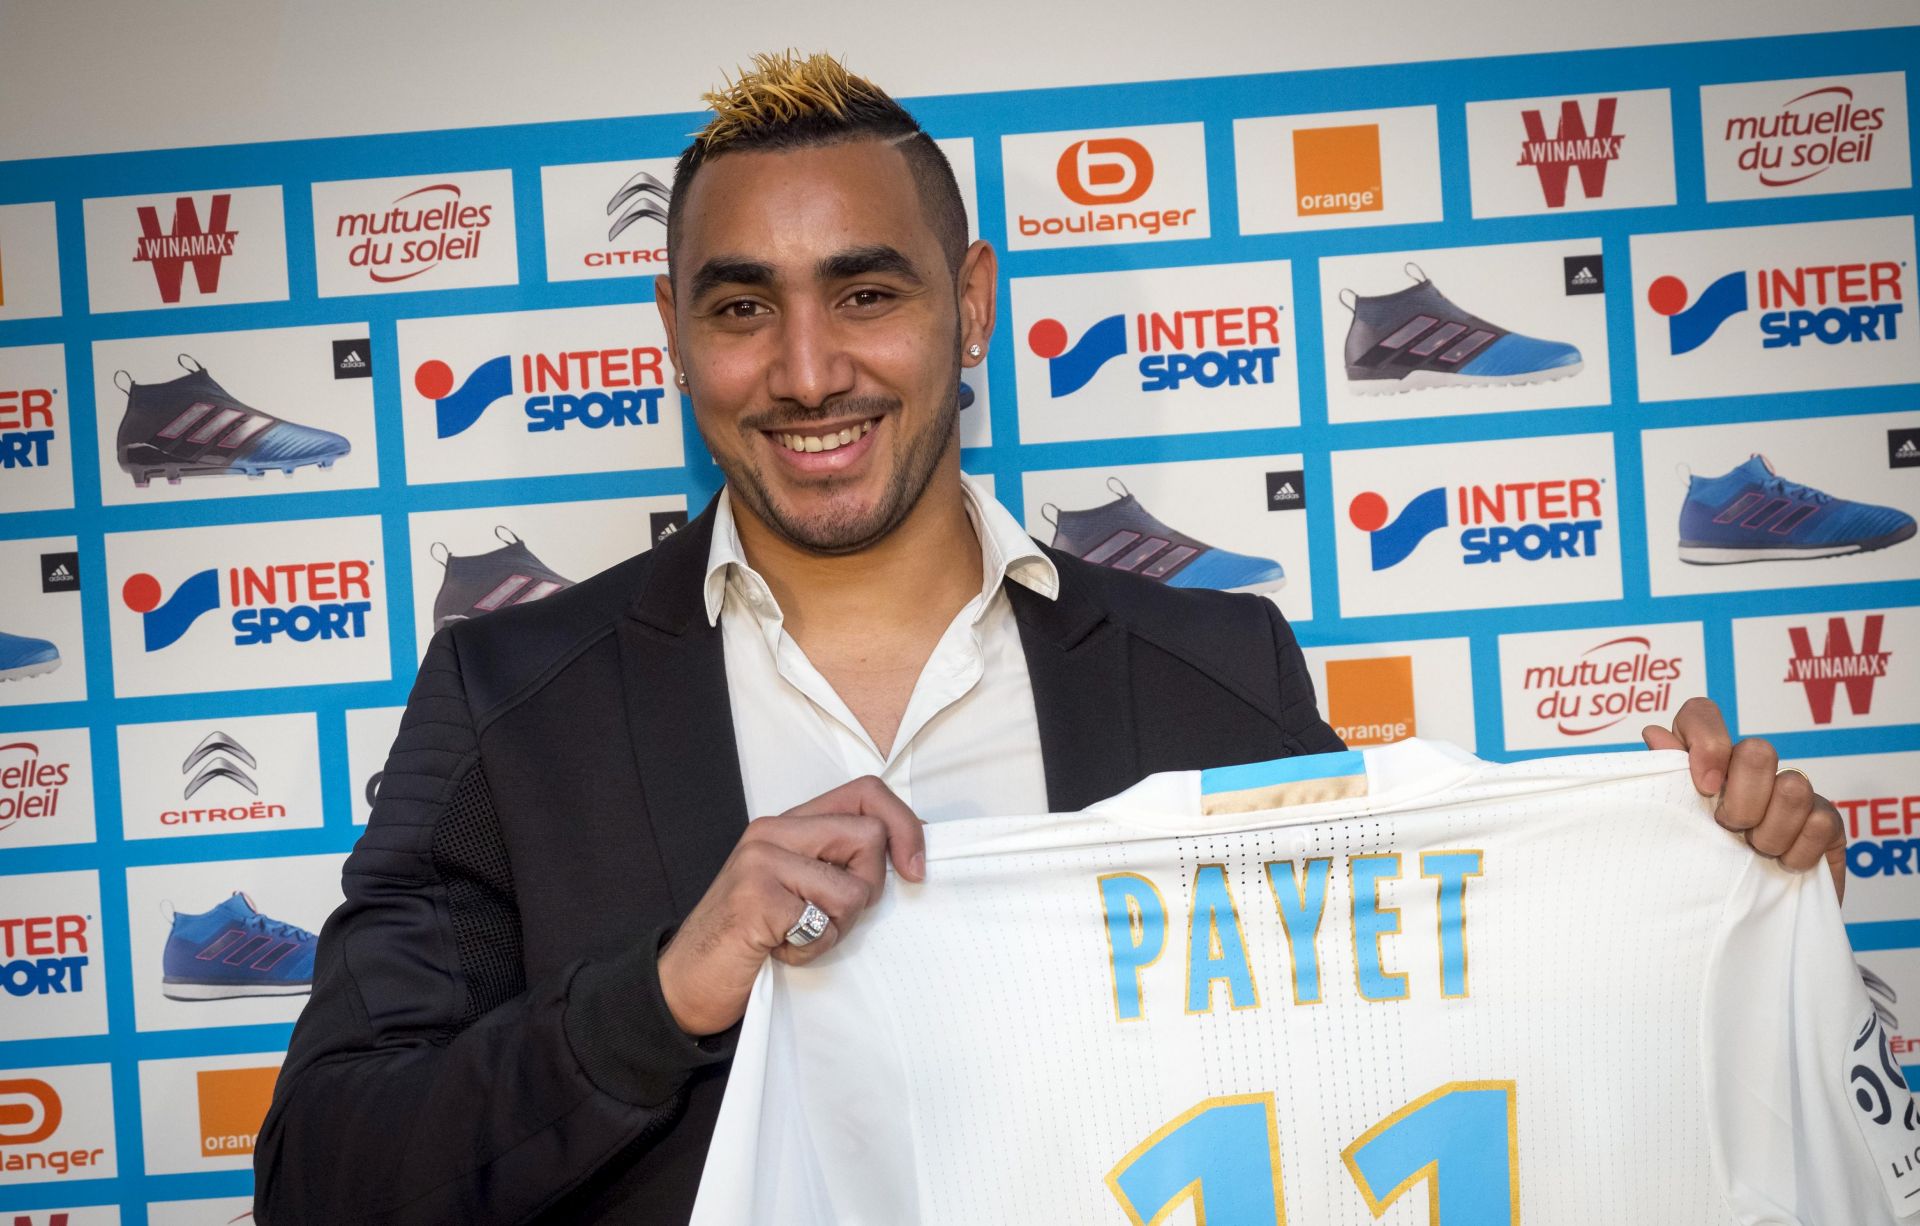 epa05761542 Olympique de Marseille's new player Dimitri Payet (C) poses with his jersey during a press conference at Robert-Louis Dreyfus Stadium in Marseille, France, 30 January 2017.  EPA/ARNOLD JEROCKI